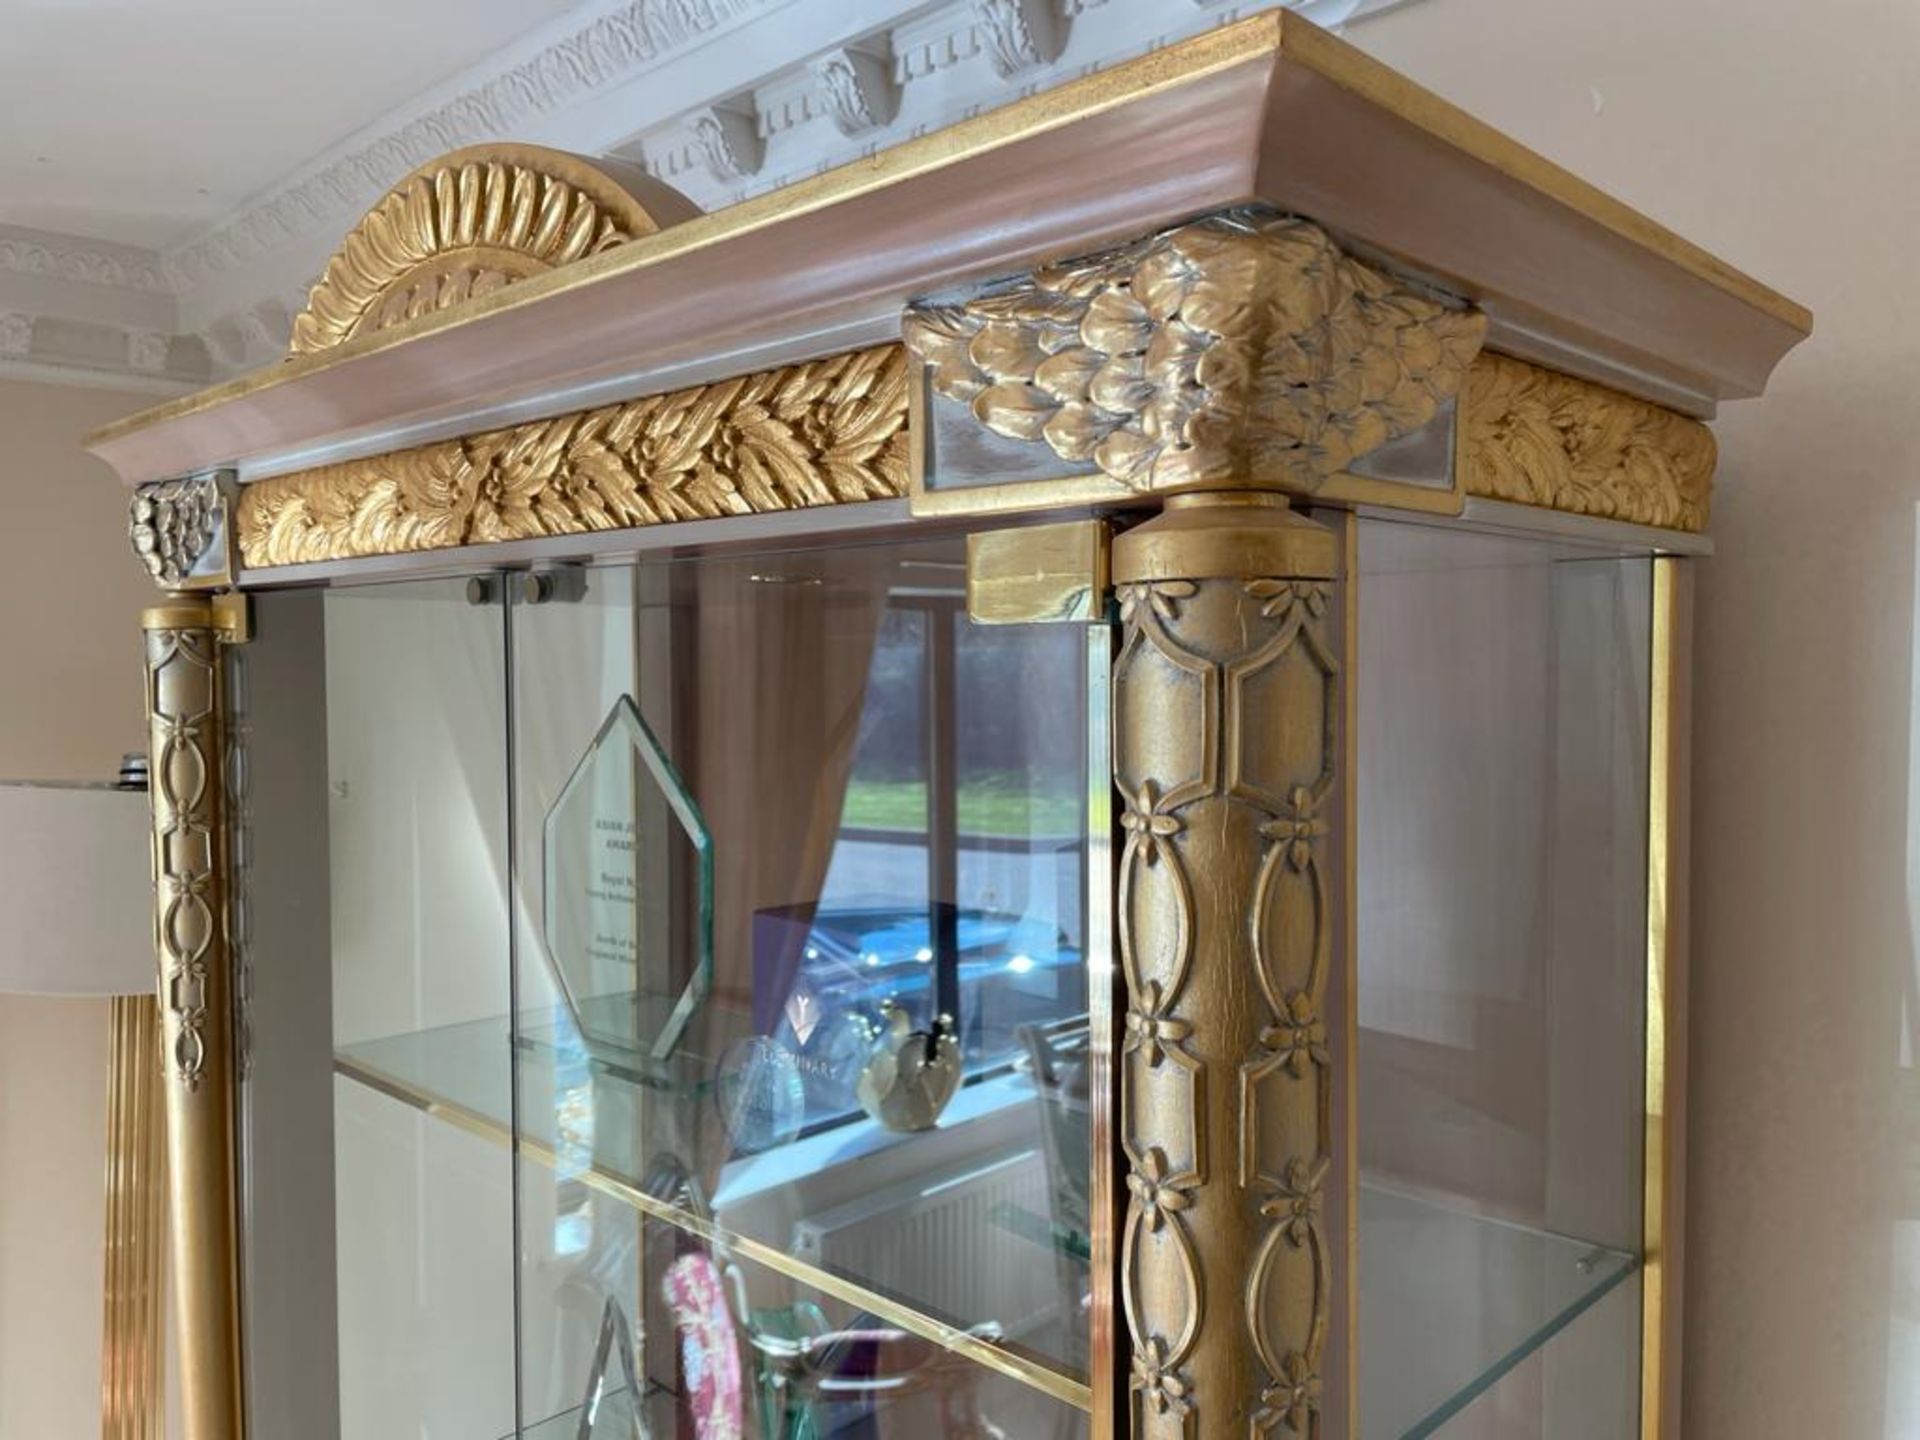 1 x Grand Showcase Upright Display Cabinet With Carved Wood Detail Finished in Gold - Features - Image 8 of 11